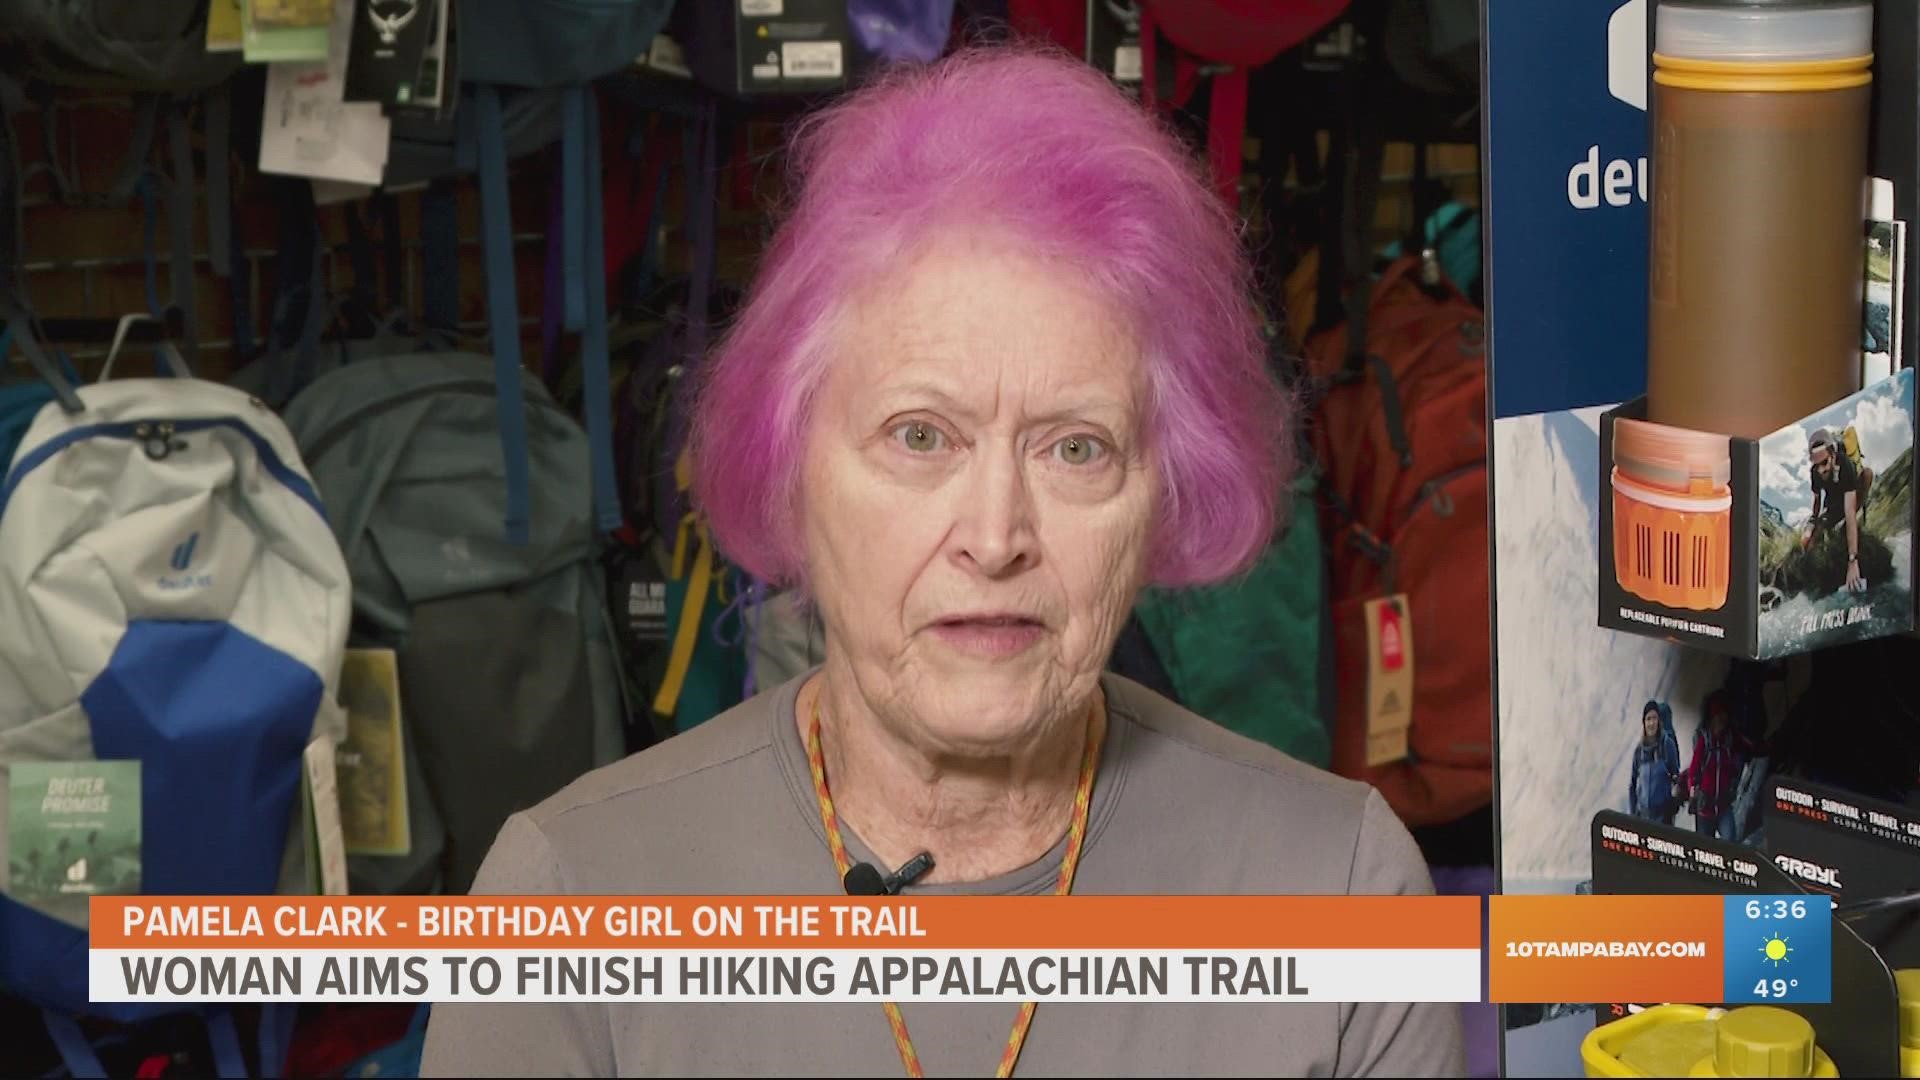 Pamela Clark started the hike on her birthday in March and needs to finish within a year to set a record.